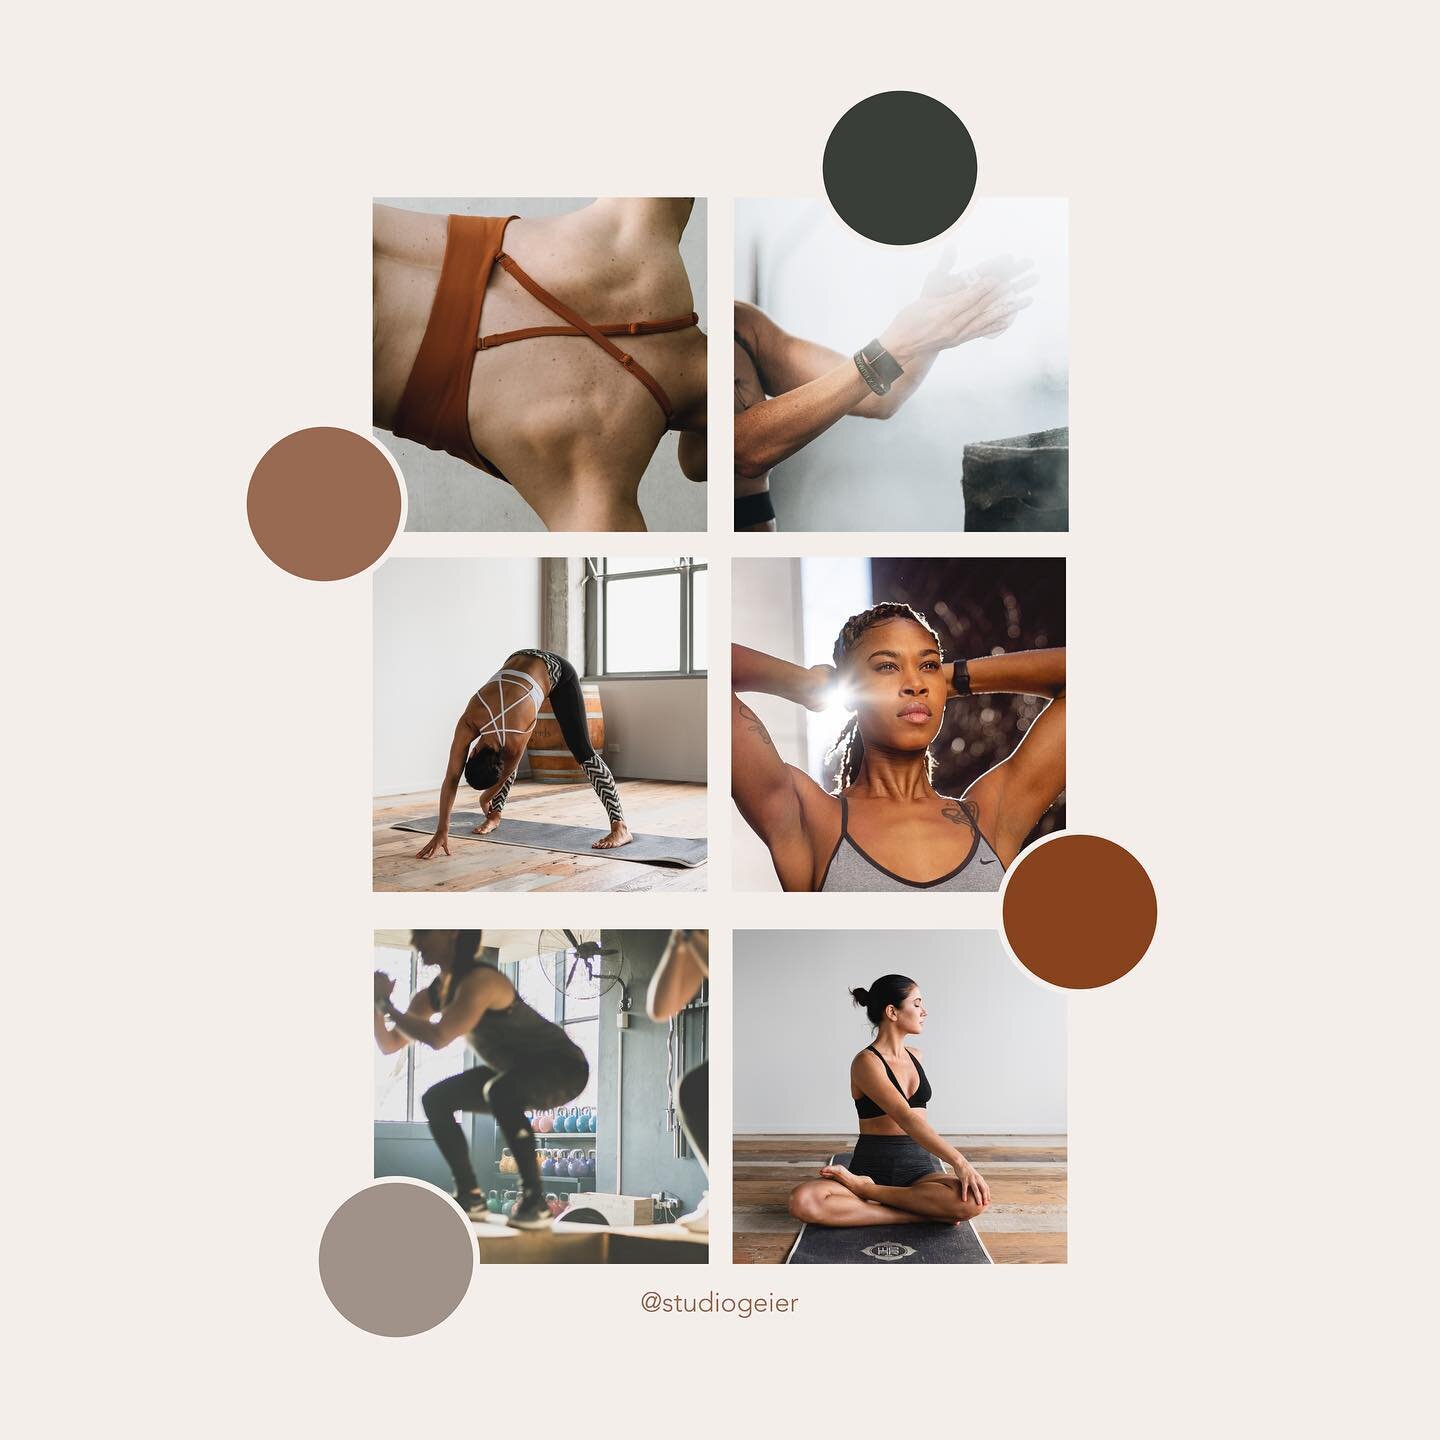 Moodboard for &ldquo;Frankie Barlowe&rdquo; ✨🥰

A draft for @hellotayloramy weekly design brief #thebriefbabes 🤞🏼

business name: frankie barlowe

business: fitness and / or wellness
client name: frankie barlowe
brand story: frankie has gotten to 